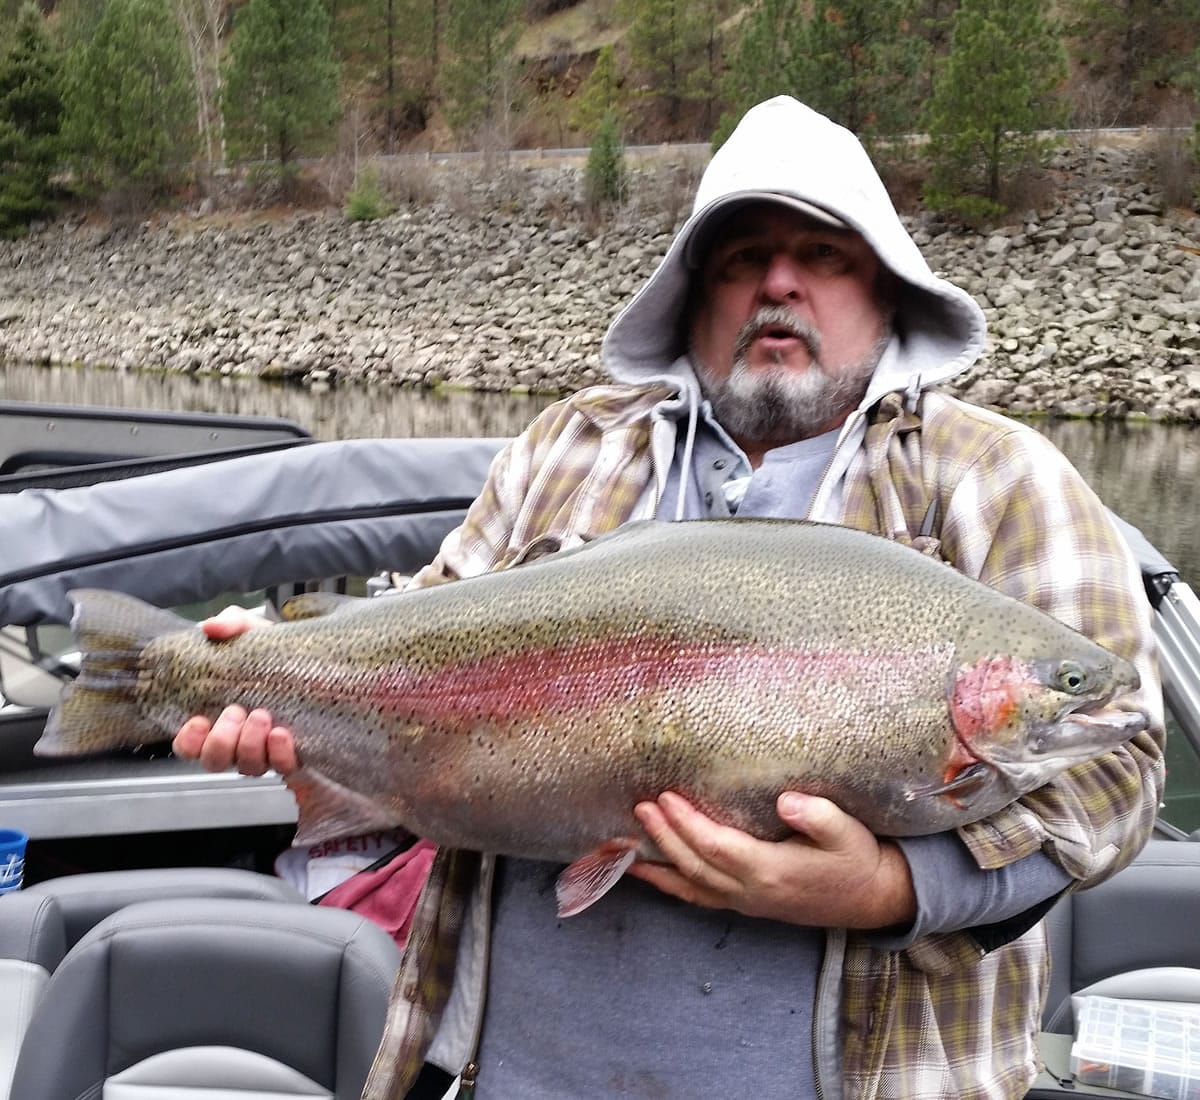 Larry Warren of Orofino, Idaho, with a 28.37 pound rainboat trout he caught below Dworshak Dam on the North Fork of the Clearwater River.